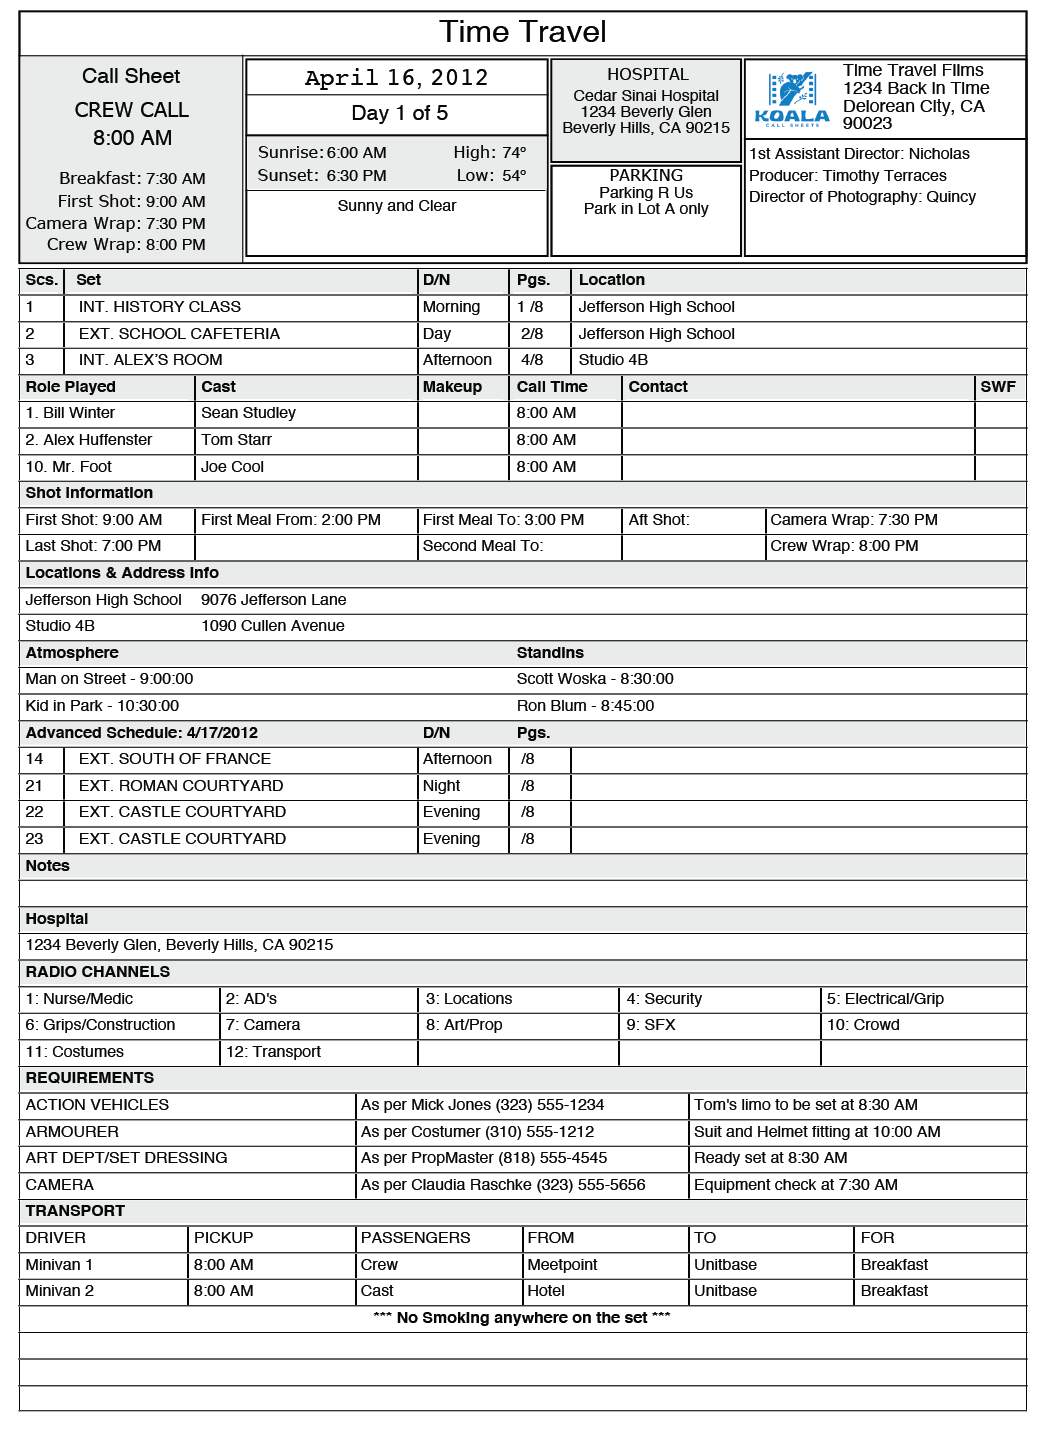 FREE Call Sheet Template in Excel Intended For Film Call Sheet Template Word